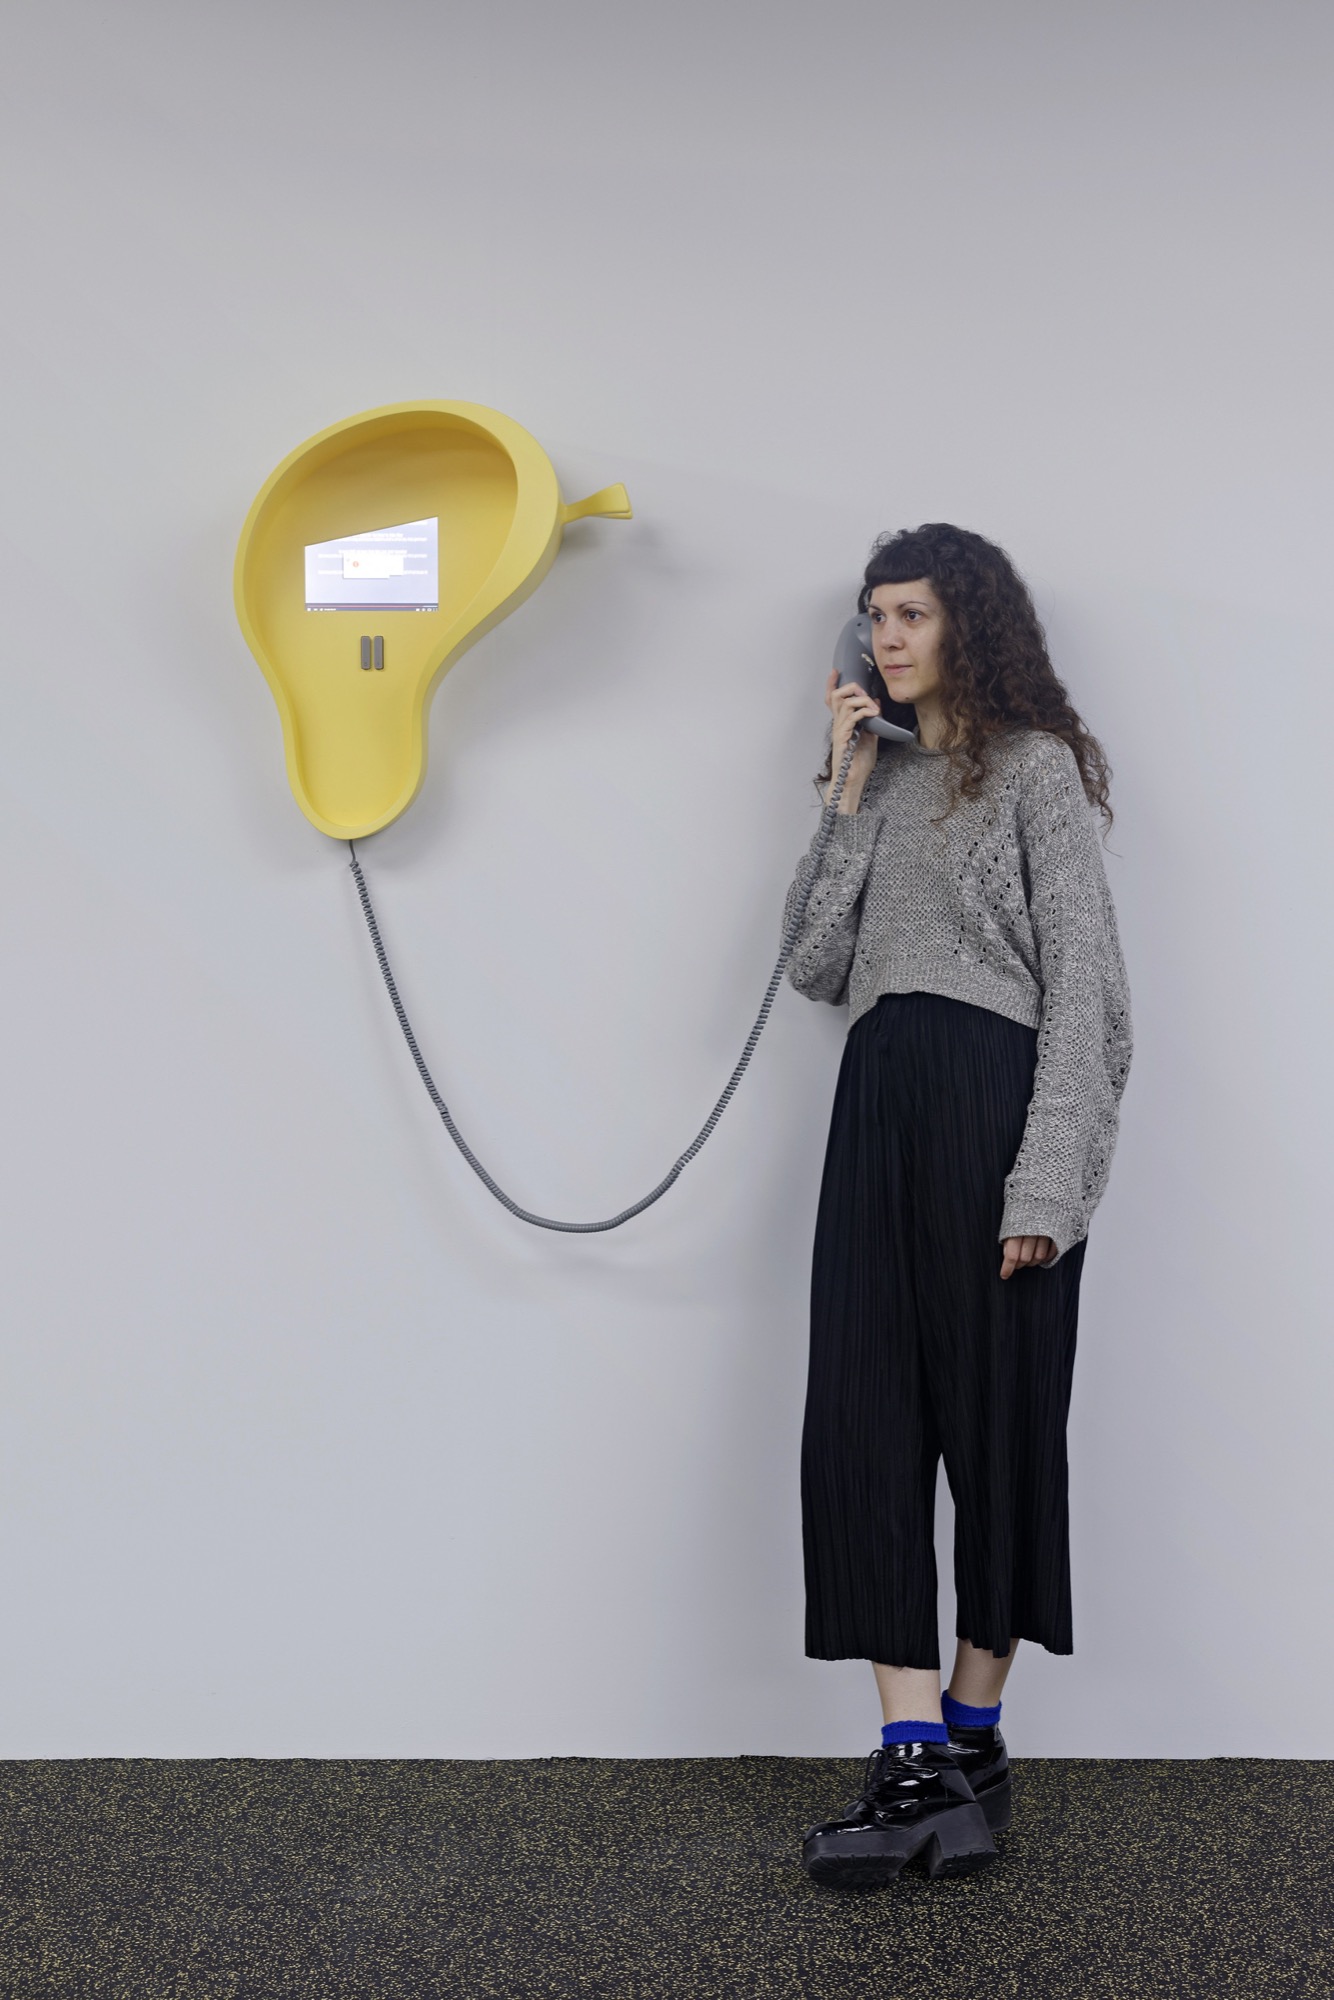 Camille Henrot, <em>Bad Dad &amp; Beyond</em>, 2015, three dimensional resin print, HDMI 4 pi 10.1”, HMDI cable, 9V AC/DC 1000 mA, power adaptor, IR sensor, 8 ohm speaker small, class D amp, soundcard (USBconnected), 1/8” cable, pushbutton, jumper wire: 6-pin female conn, RJ11 jack, 25 ft Vodavi Gray Phone Cord, Rasp Pi 2 Model B V1.1, power cord USB, ethernet cable, 24 x 20 x 9 inches (phone) 61 x 50.8 x 22.9 cm, 44 x 20 x 9 inches (overall) 111.8 x 50.8 x 22.9 cm. Edition 1 of 2, 1 AP. Image courtesy of the National Gallery of Victoria.